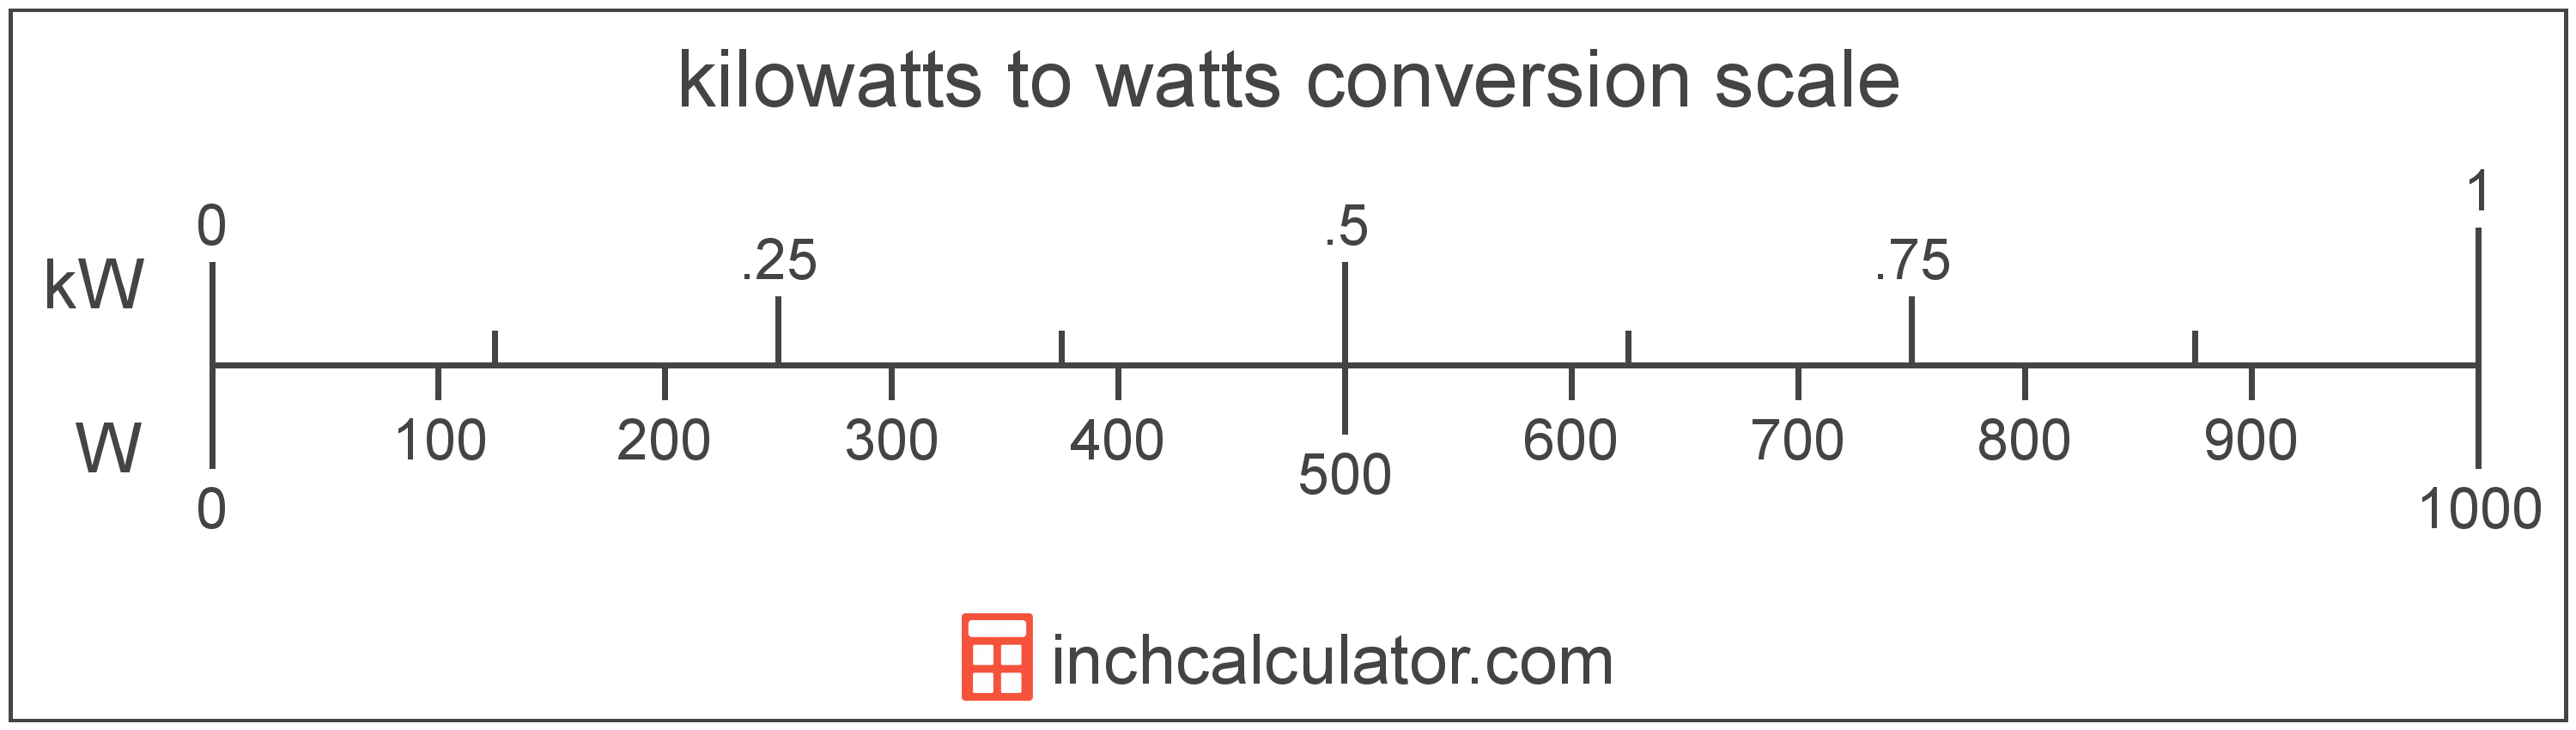 conversion scale showing kilowatts and equivalent watts power values